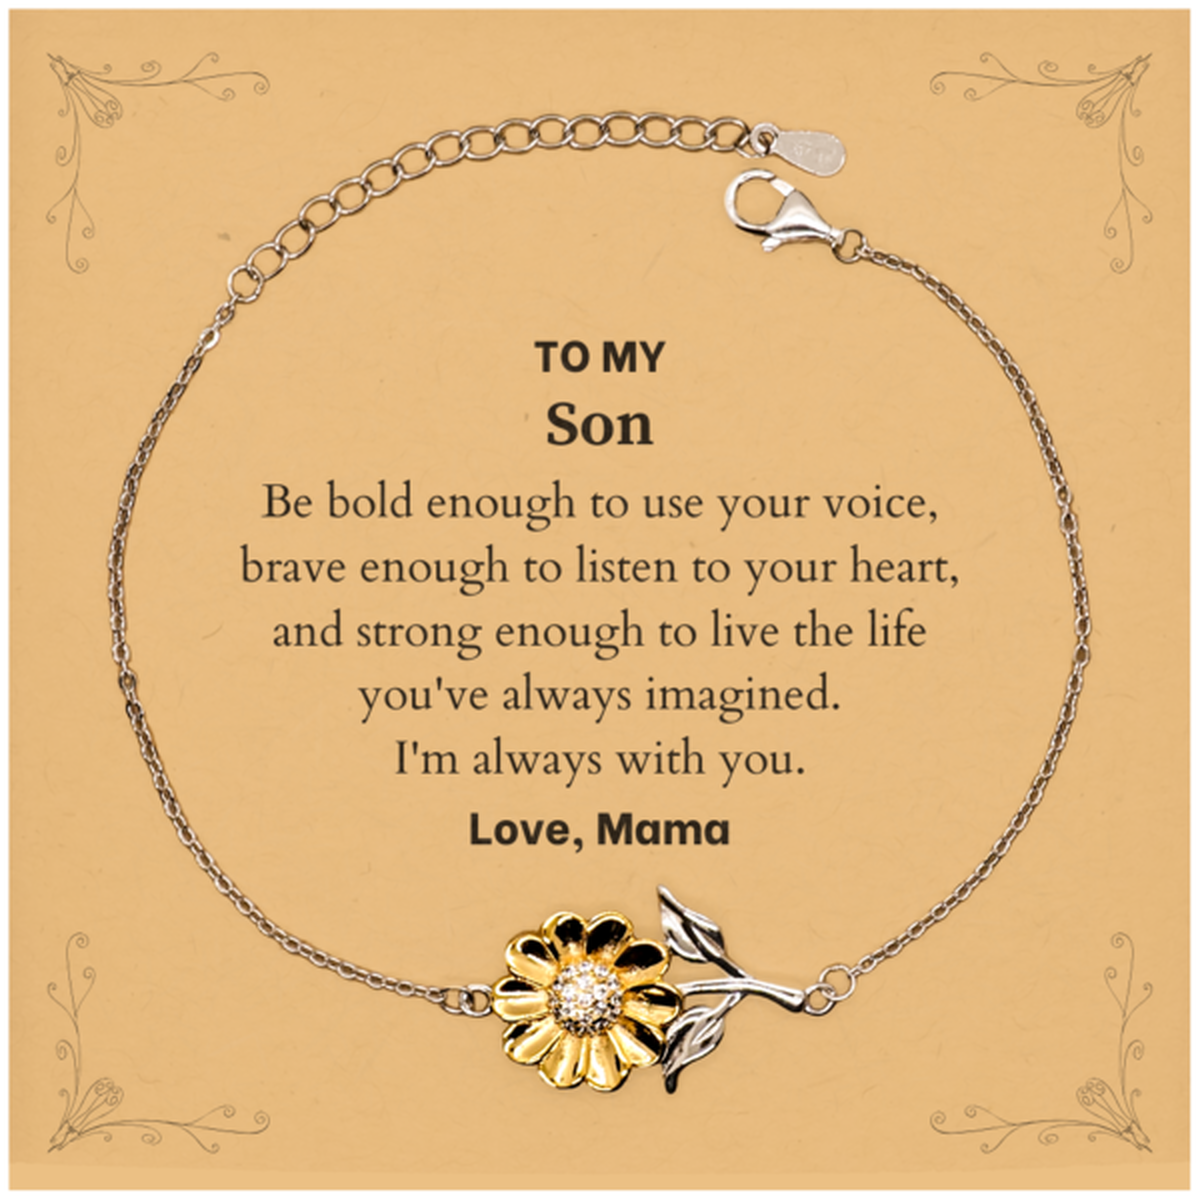 Keepsake Son Sunflower Bracelet Gift Idea Graduation Christmas Birthday Son from Mama, Son Be bold enough to use your voice, brave enough to listen to your heart. Love, Mama